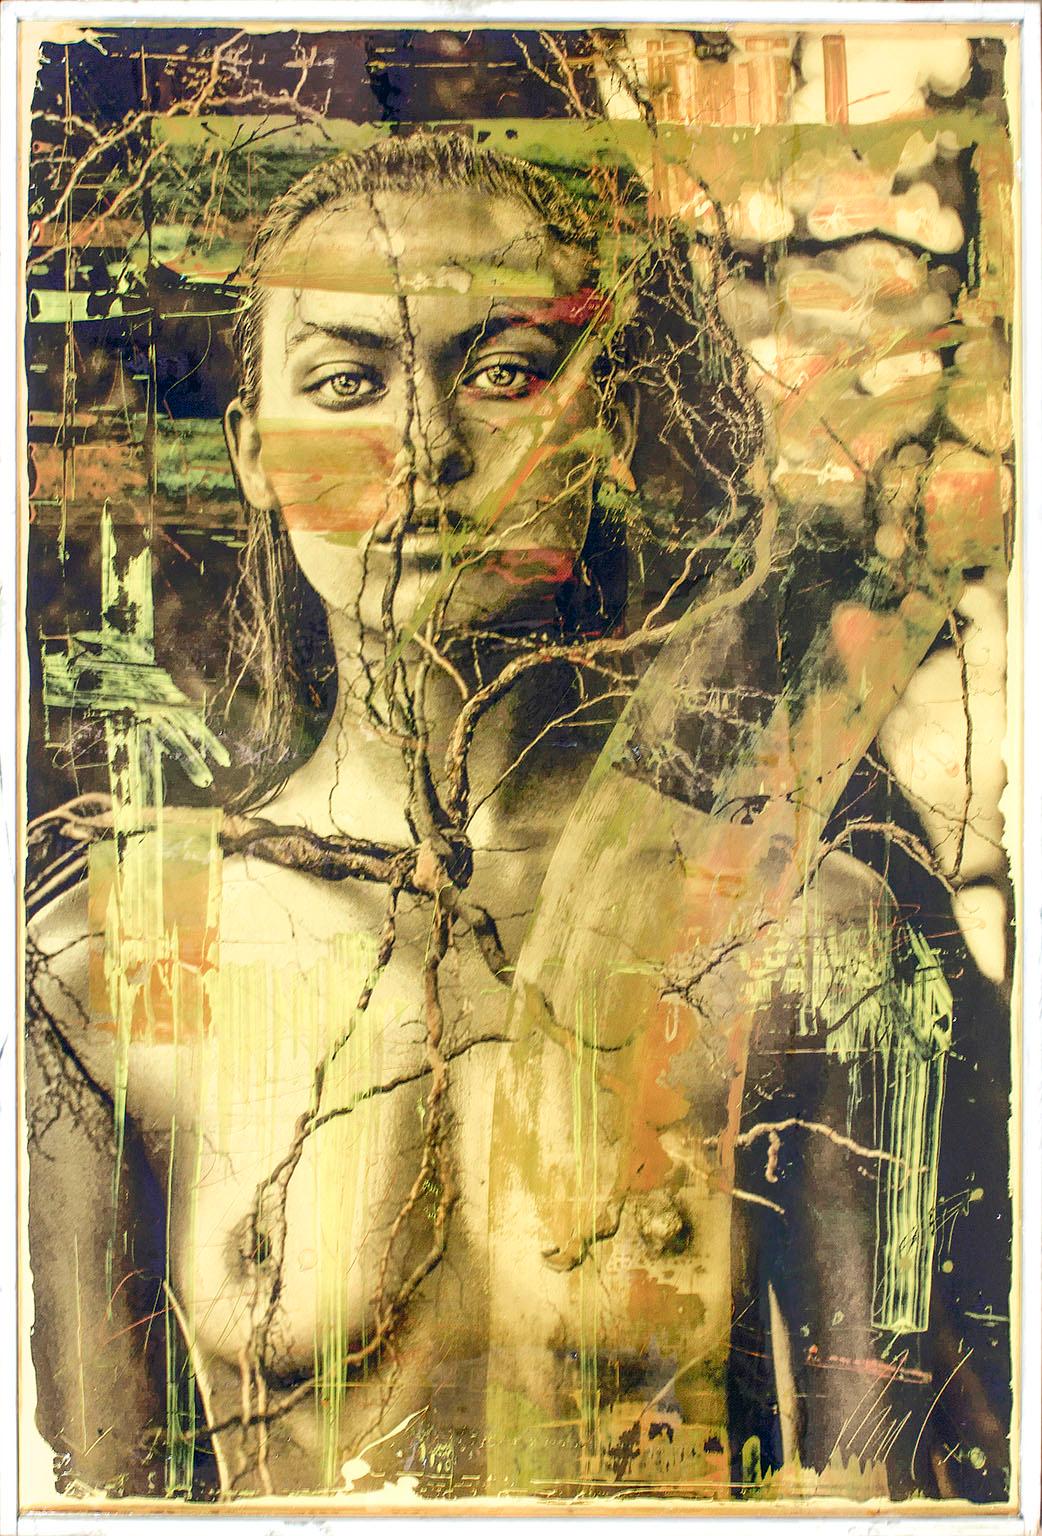 "Eocene" archival print of a nude woman and acrylic paint encased in resin signed mixed media work by artist Raphael Mazzucco.